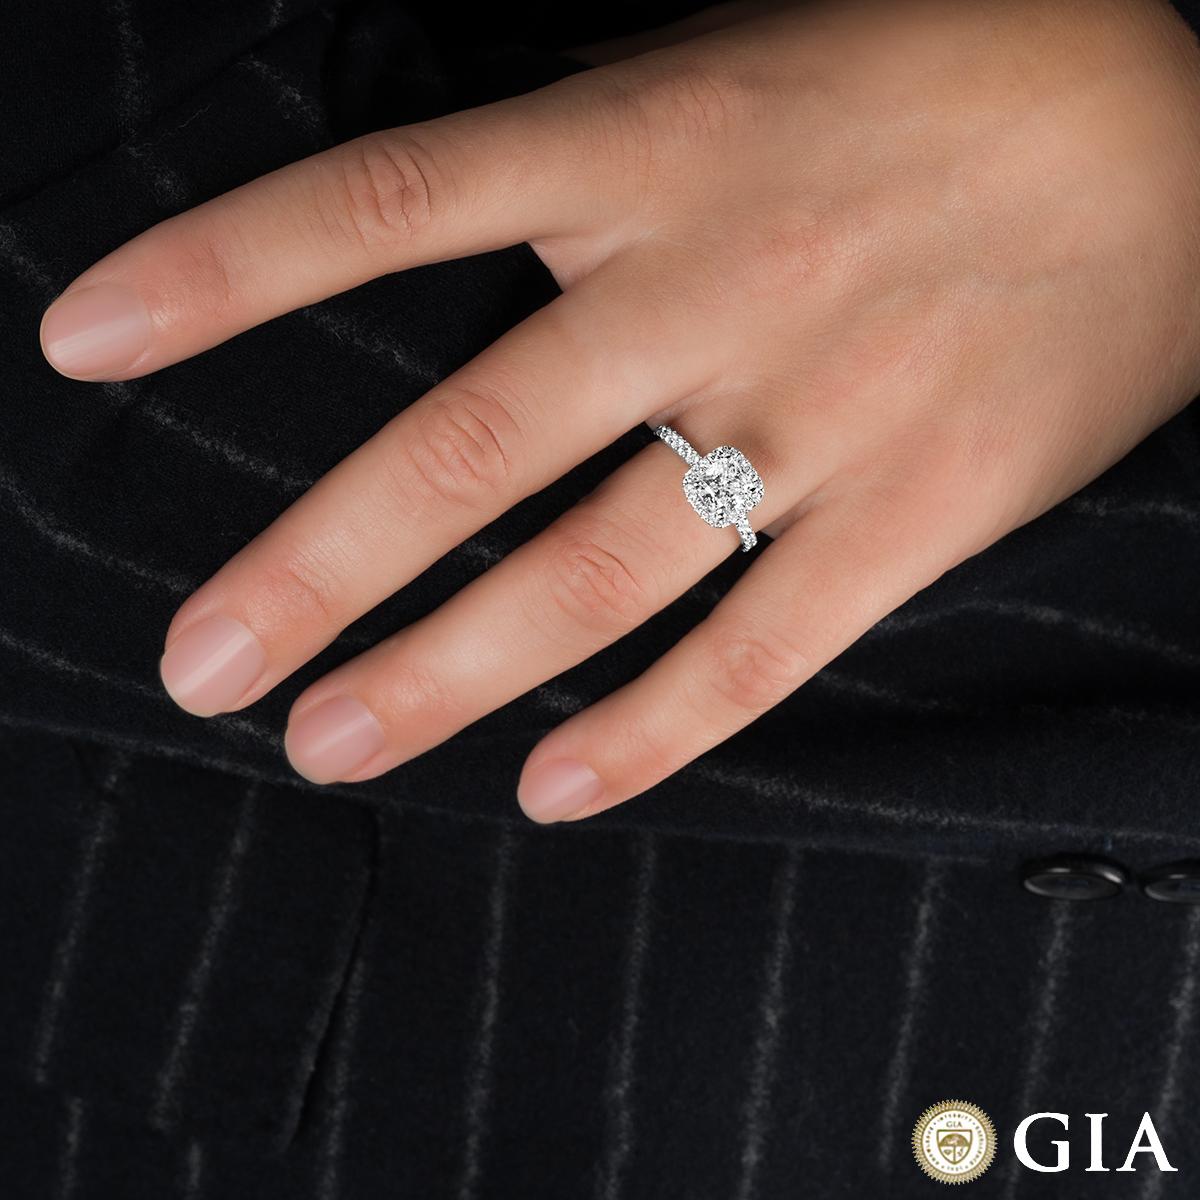 GIA Certified White Gold Cushion Cut Diamond Engagement Ring 1.51ct F/VS2 For Sale 1